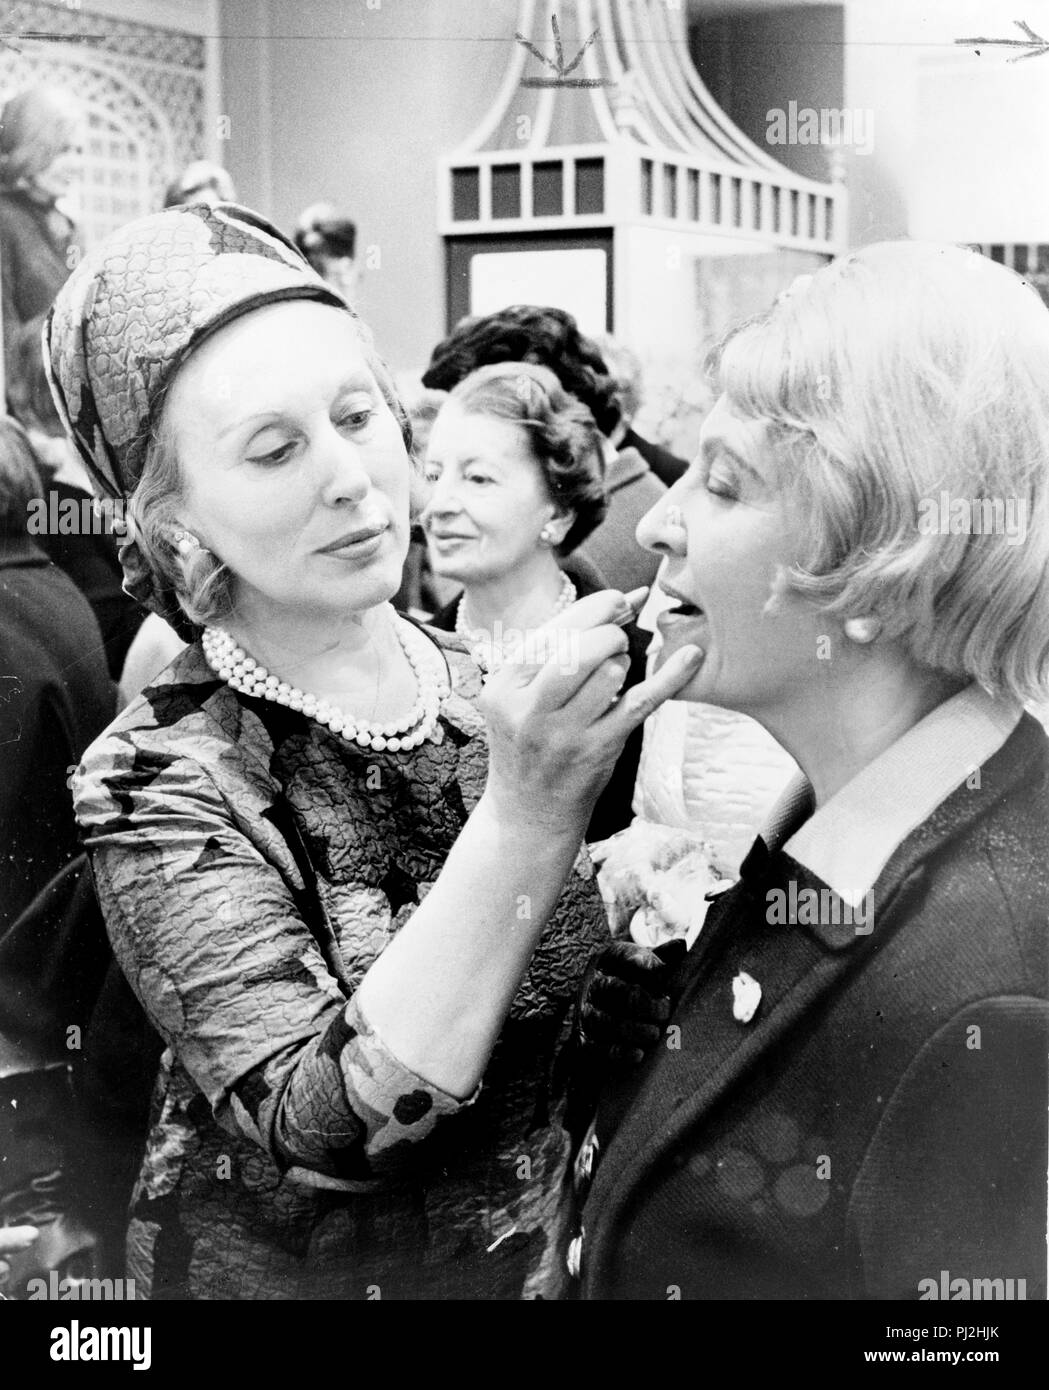 Photographic History of Estee Lauder from the WWD Archives [PHOTOS] – WWD